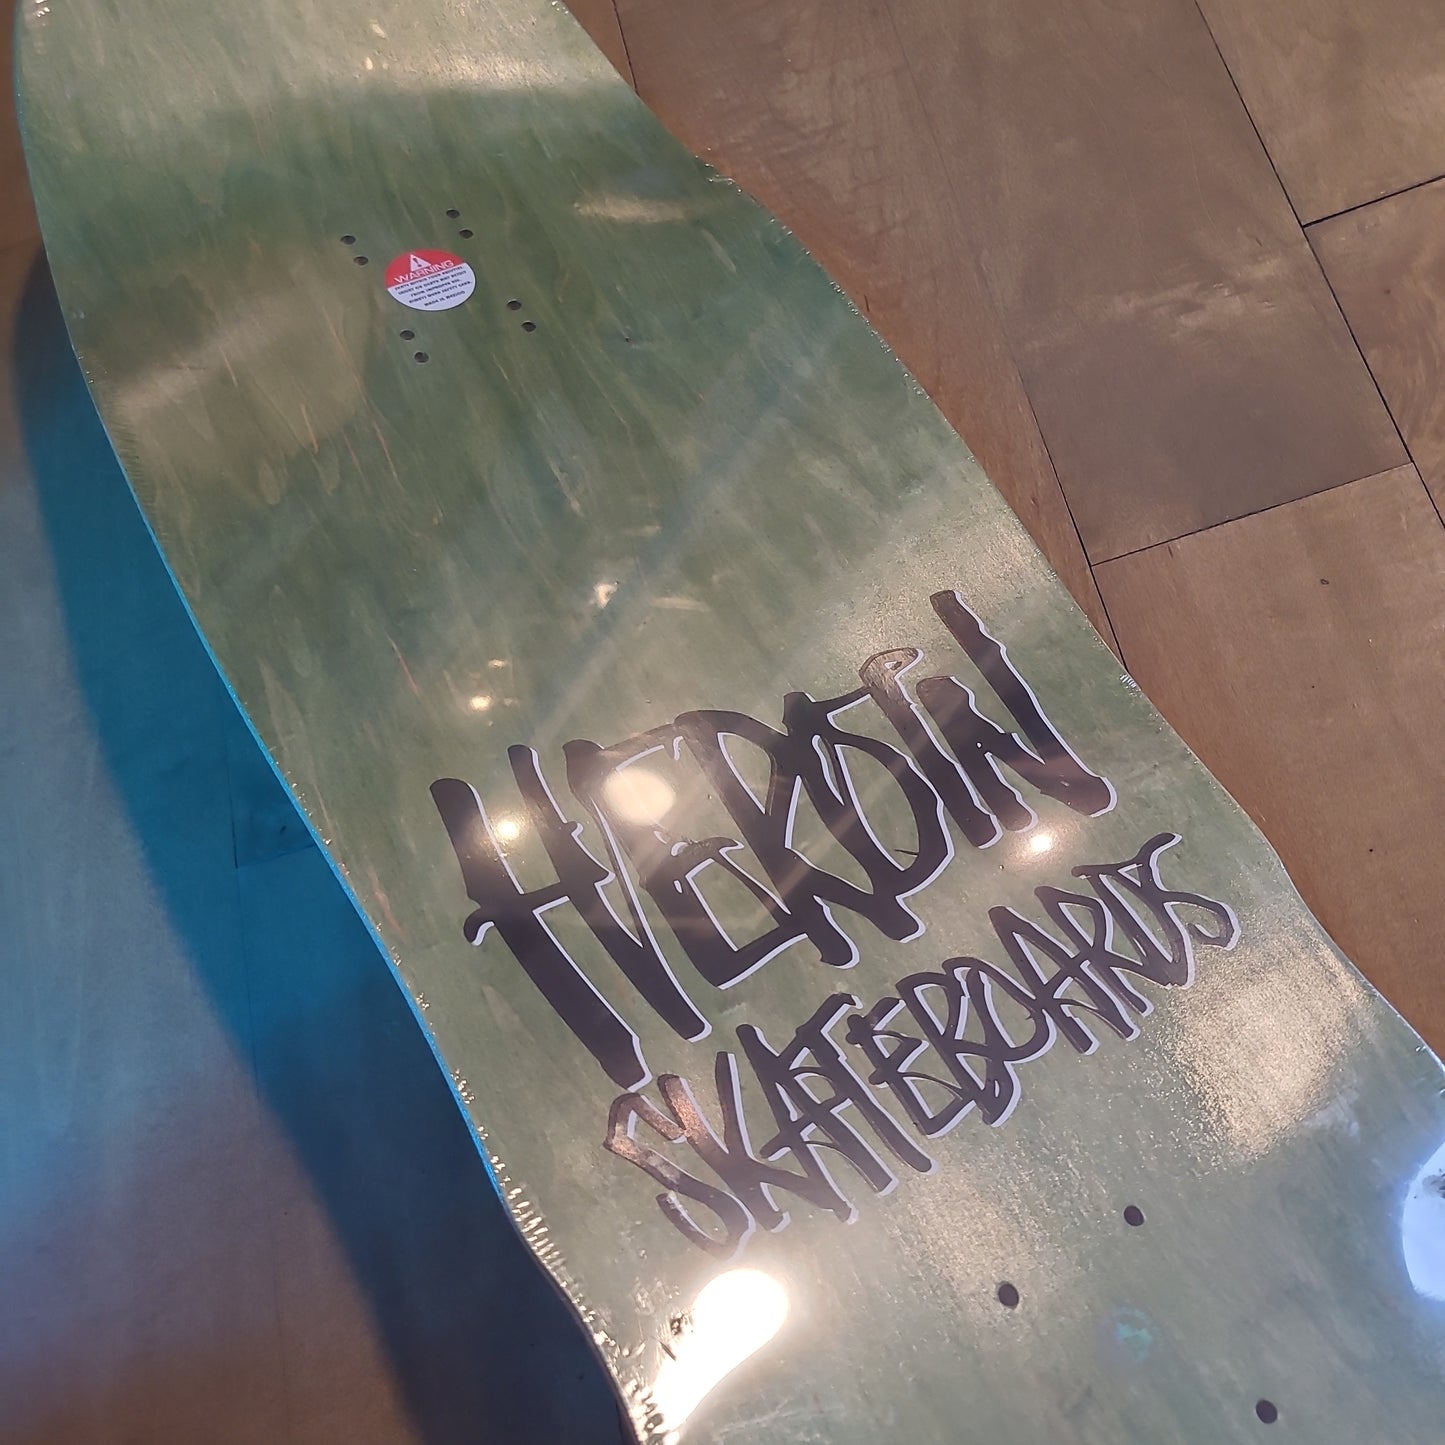 Heroin - Dead Dave Ghost Train 10.1" Shaped Deck